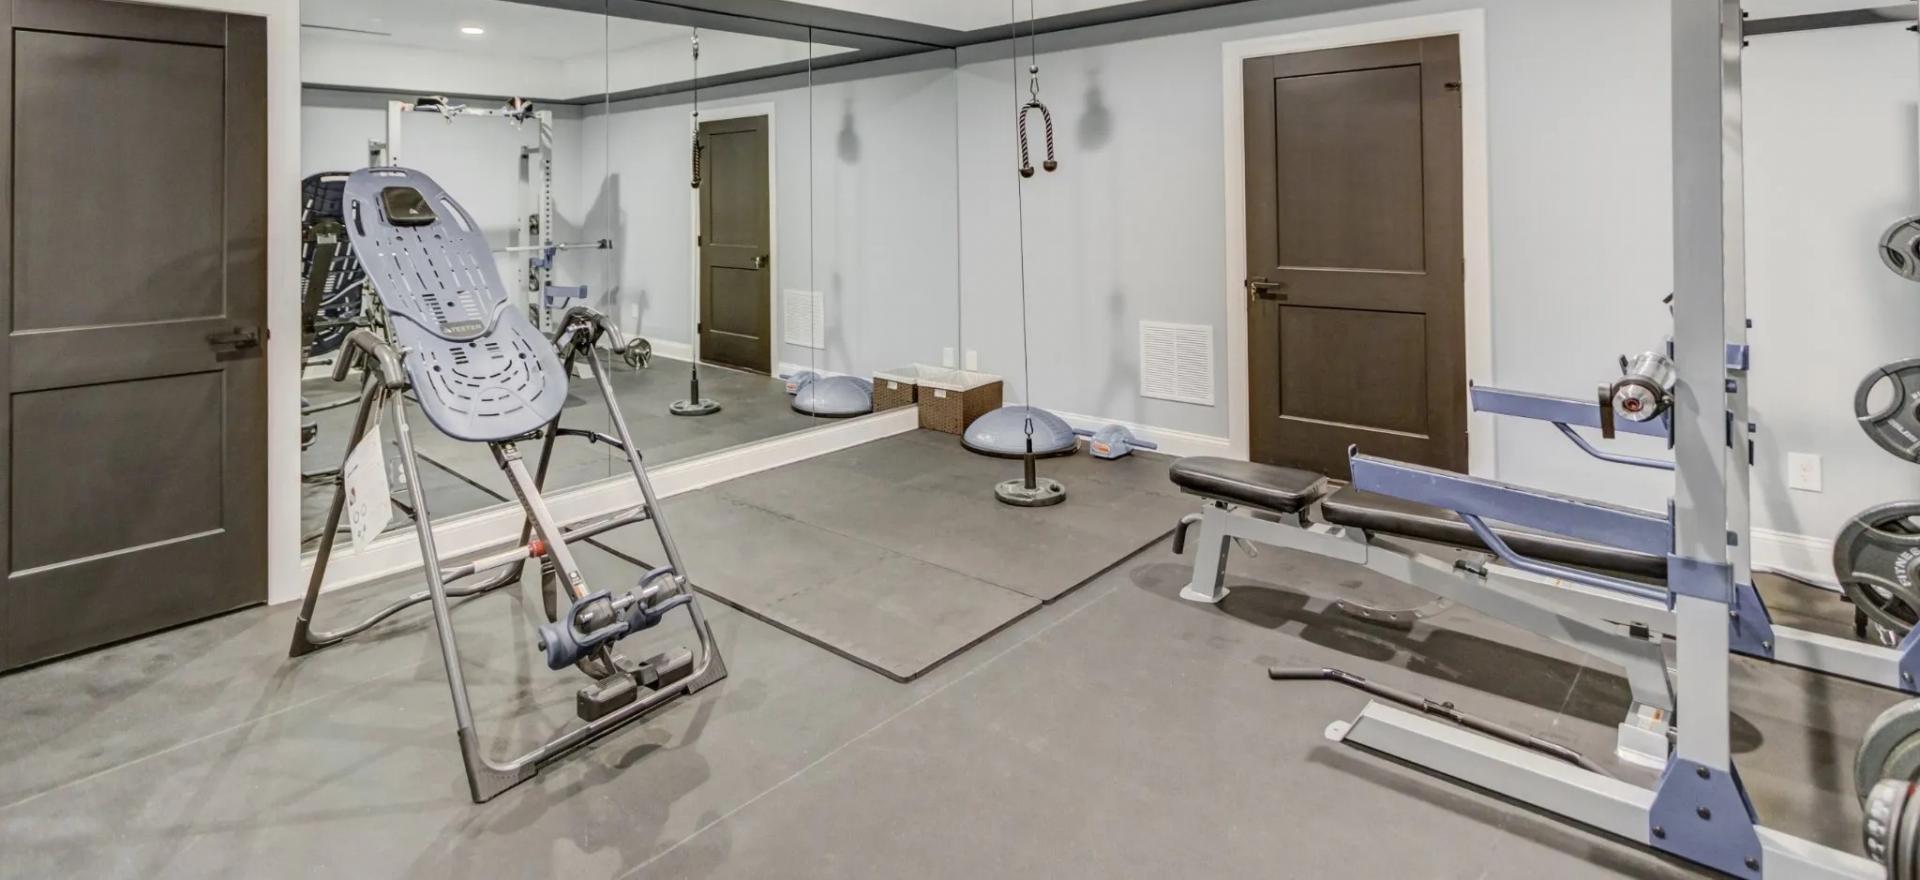 basement converted into a home gym 